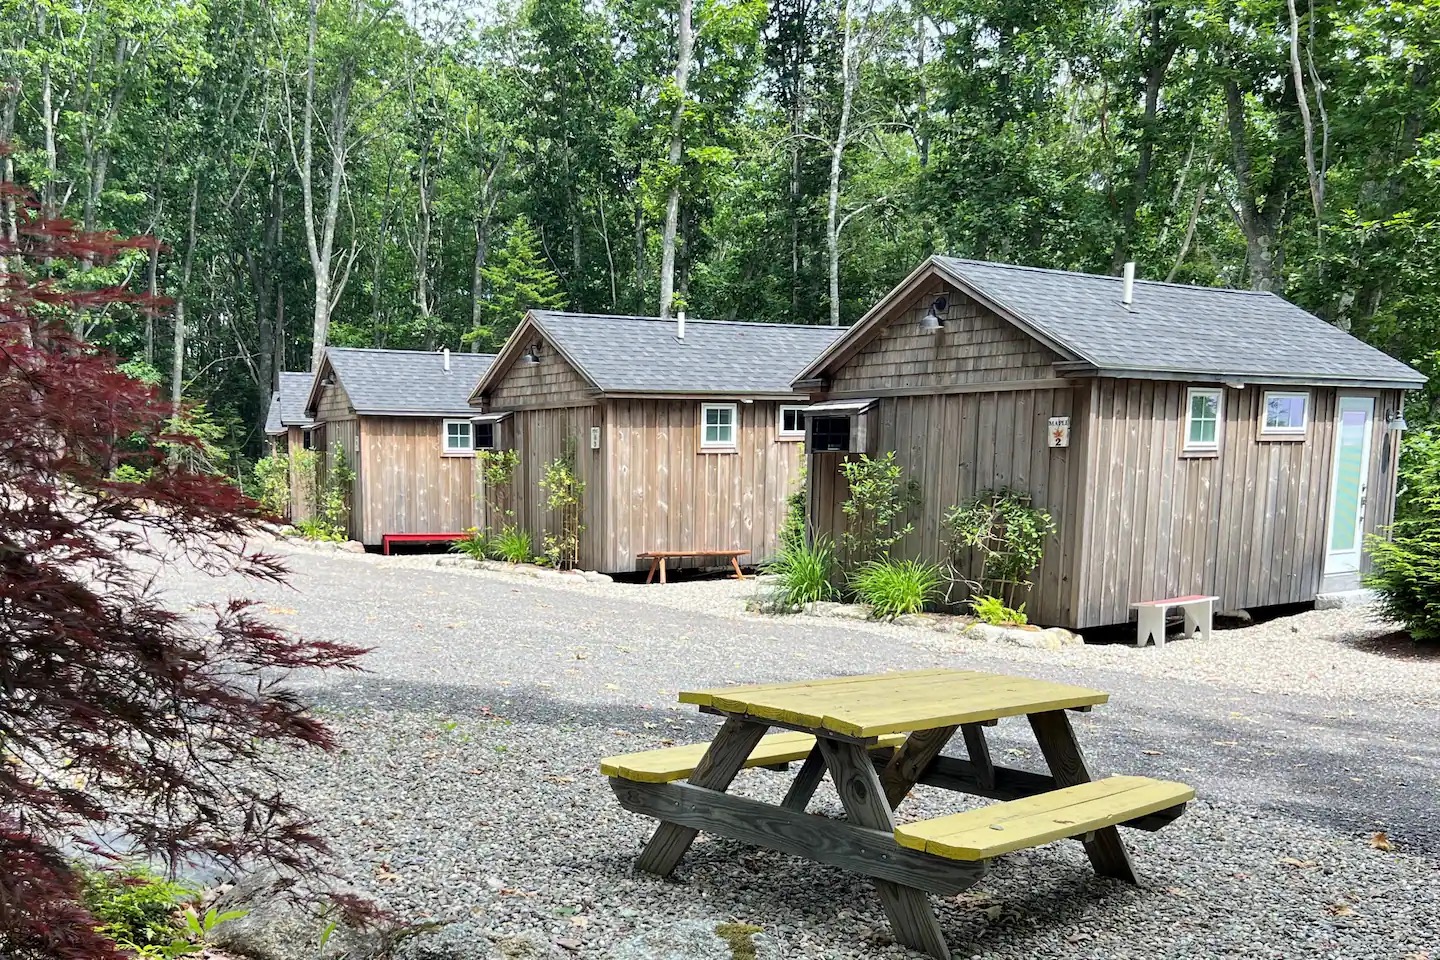 Welcome to Balsam cabin! Our cozy retreat is nestled in a tranquil setting surrounded by towering trees and lush greenery.